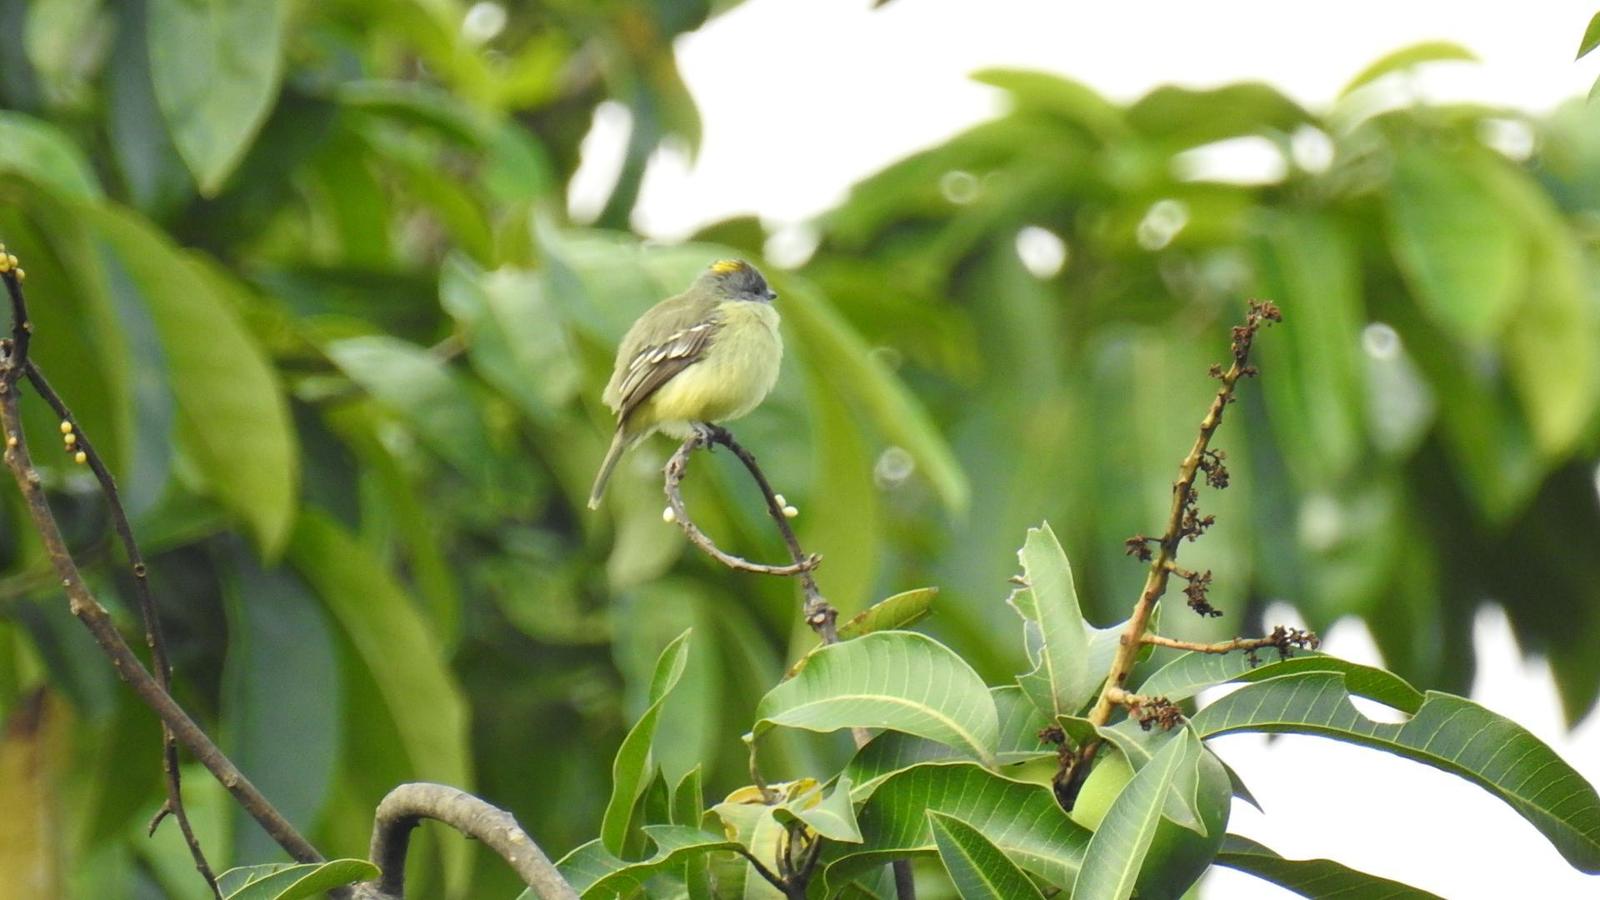 Yellow-crowned Tyrannulet Photo by Julio Delgado